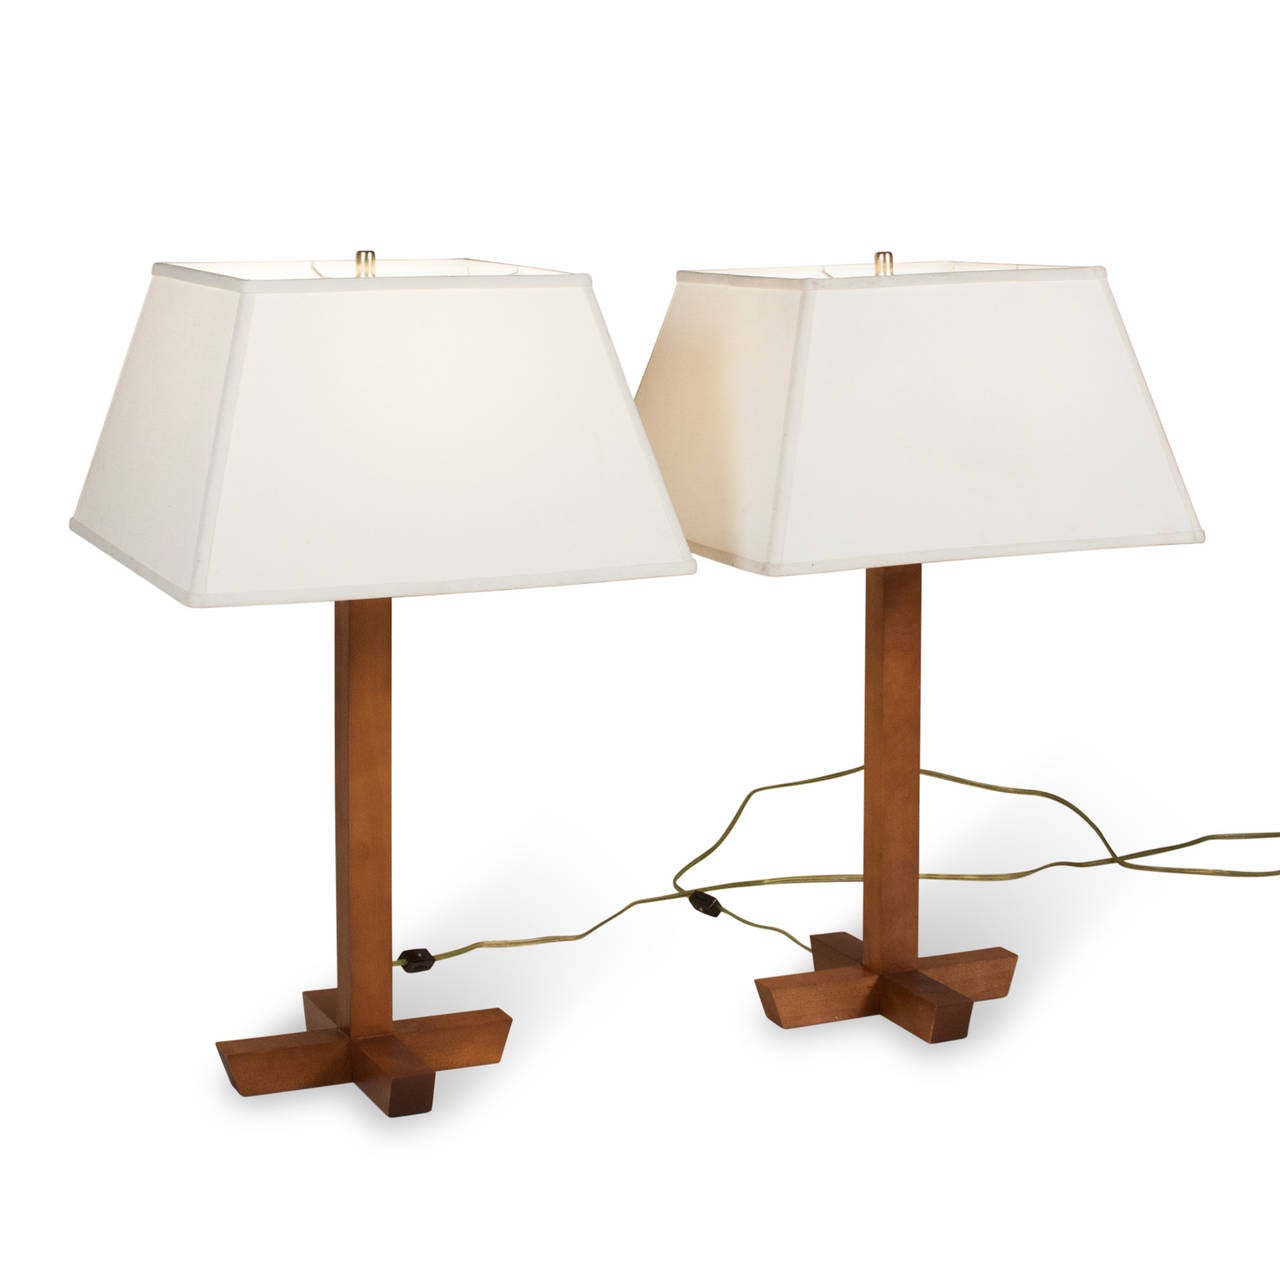 Pair of Walnut Table Lamps In Good Condition For Sale In Brooklyn, NY